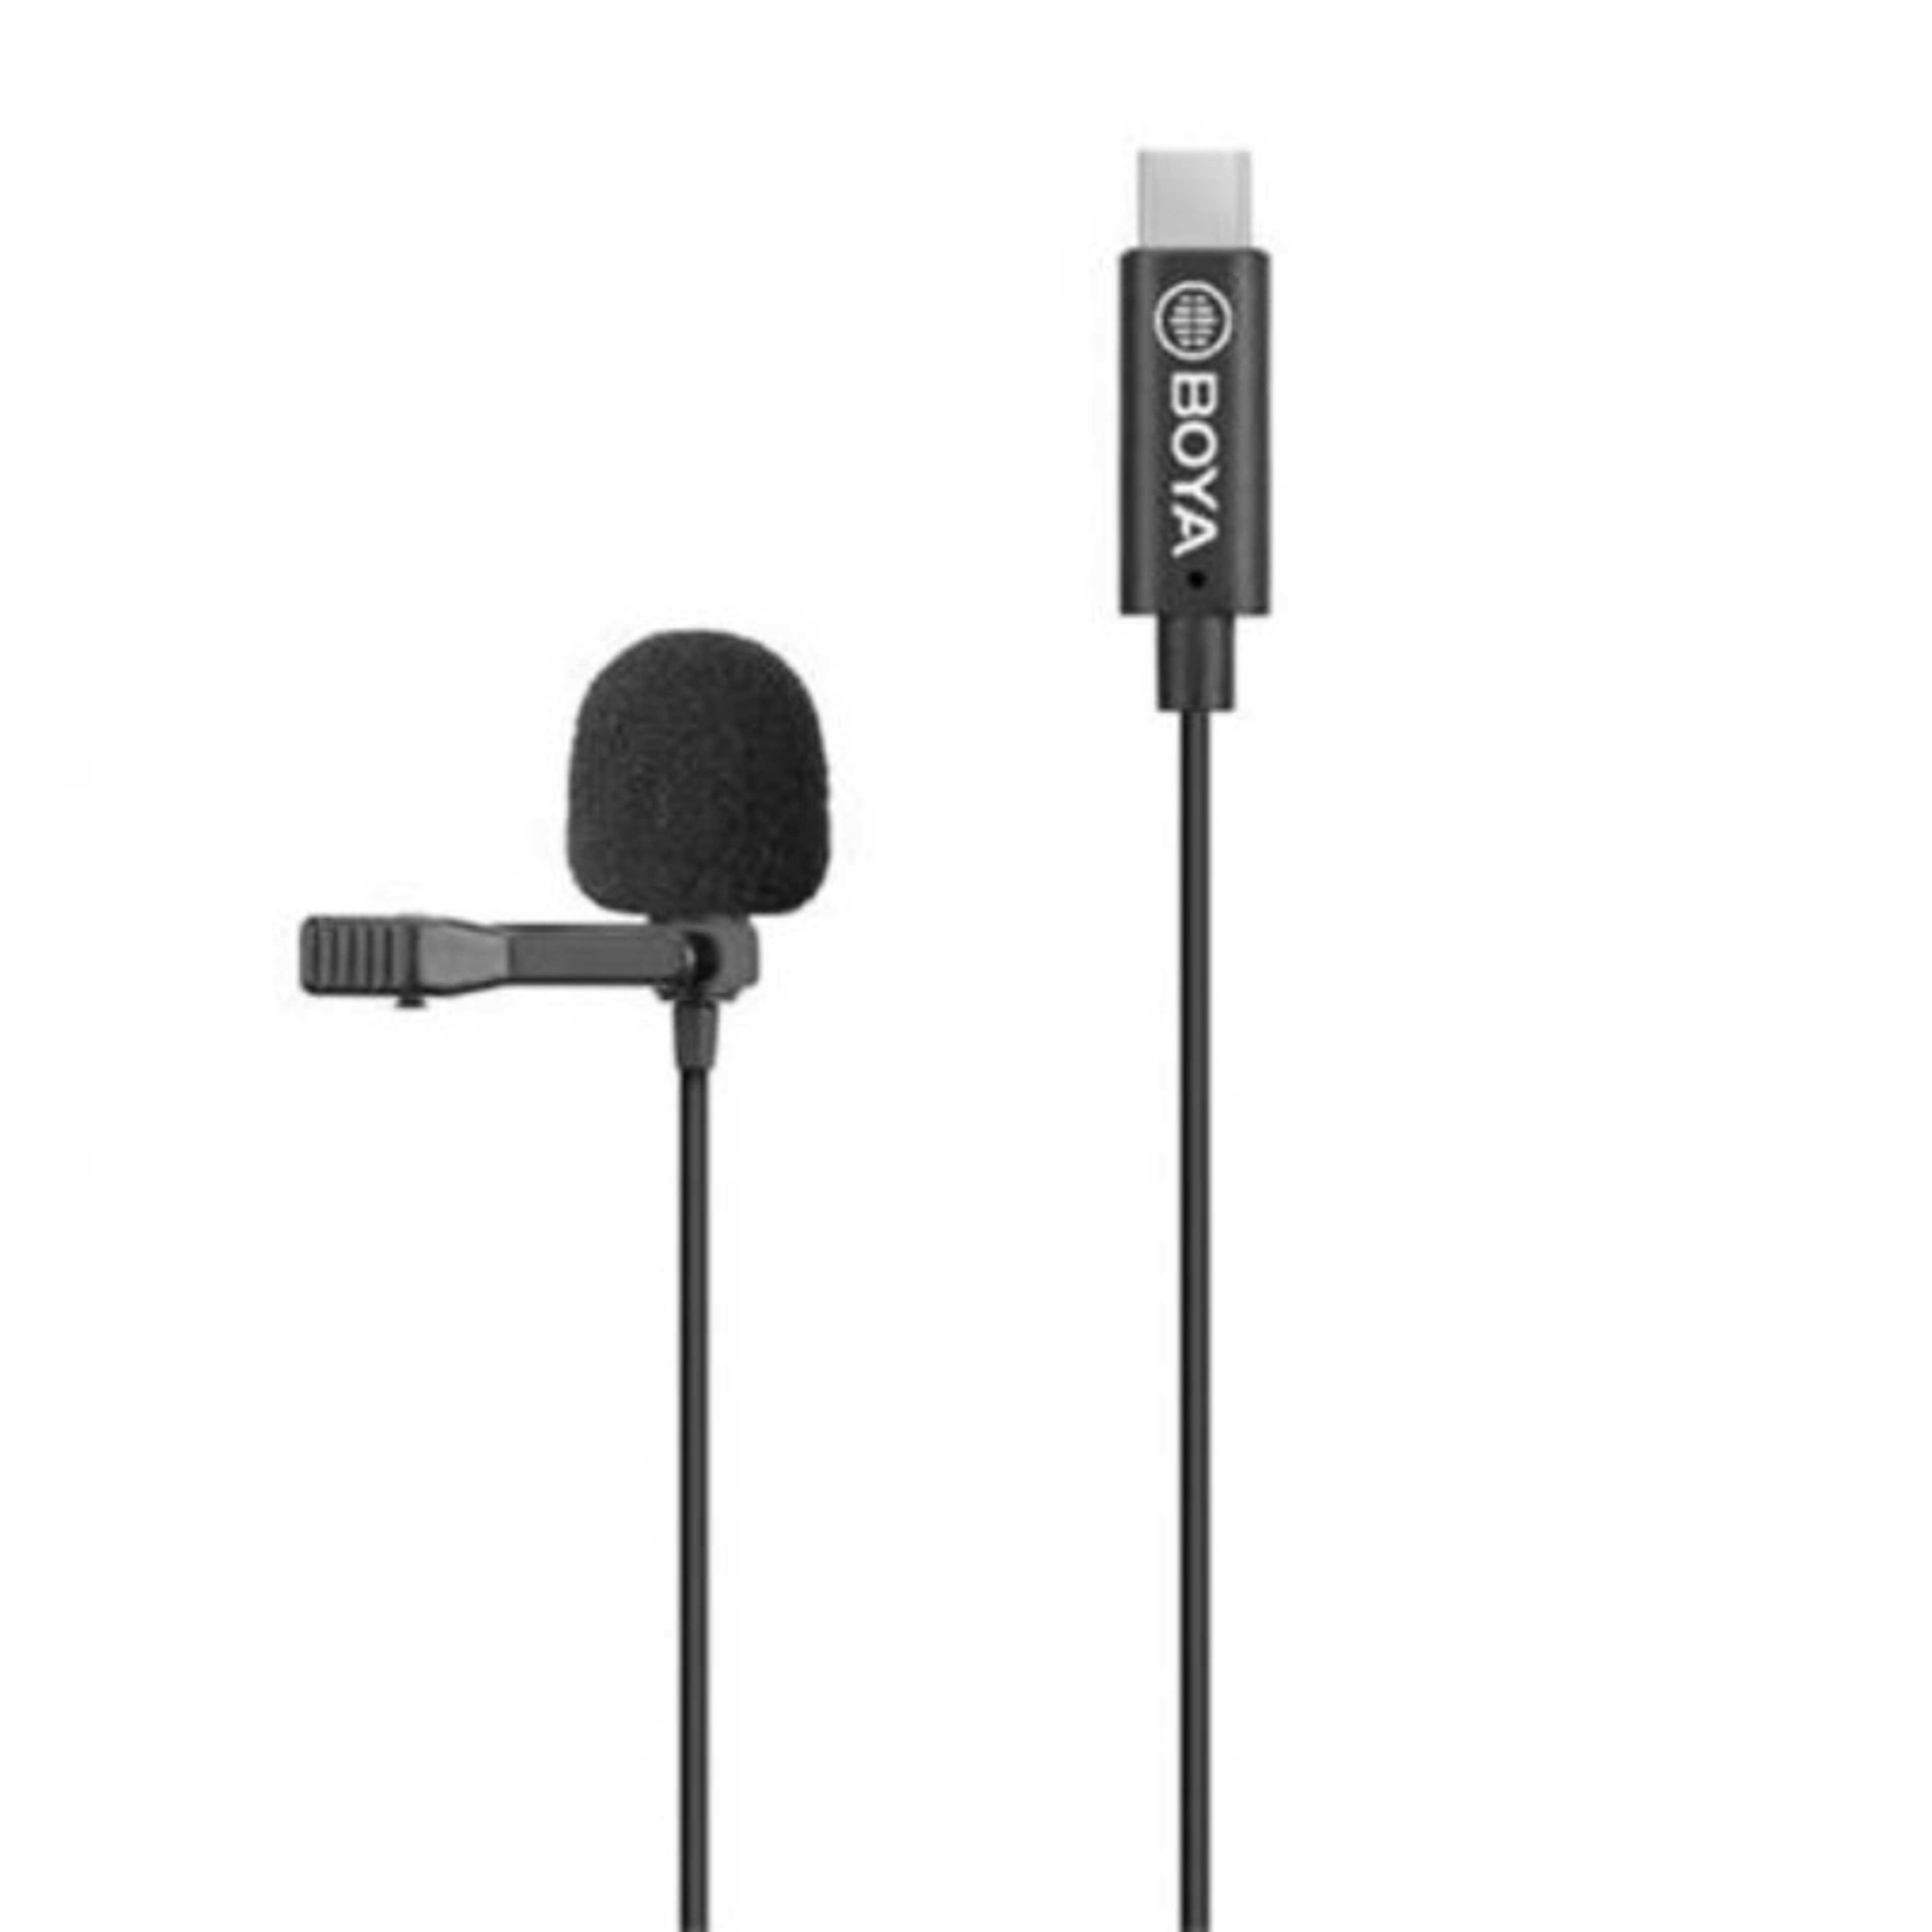 Boya BY-M3 Clip-on Lavalier Microphone for Android/Type C Devices